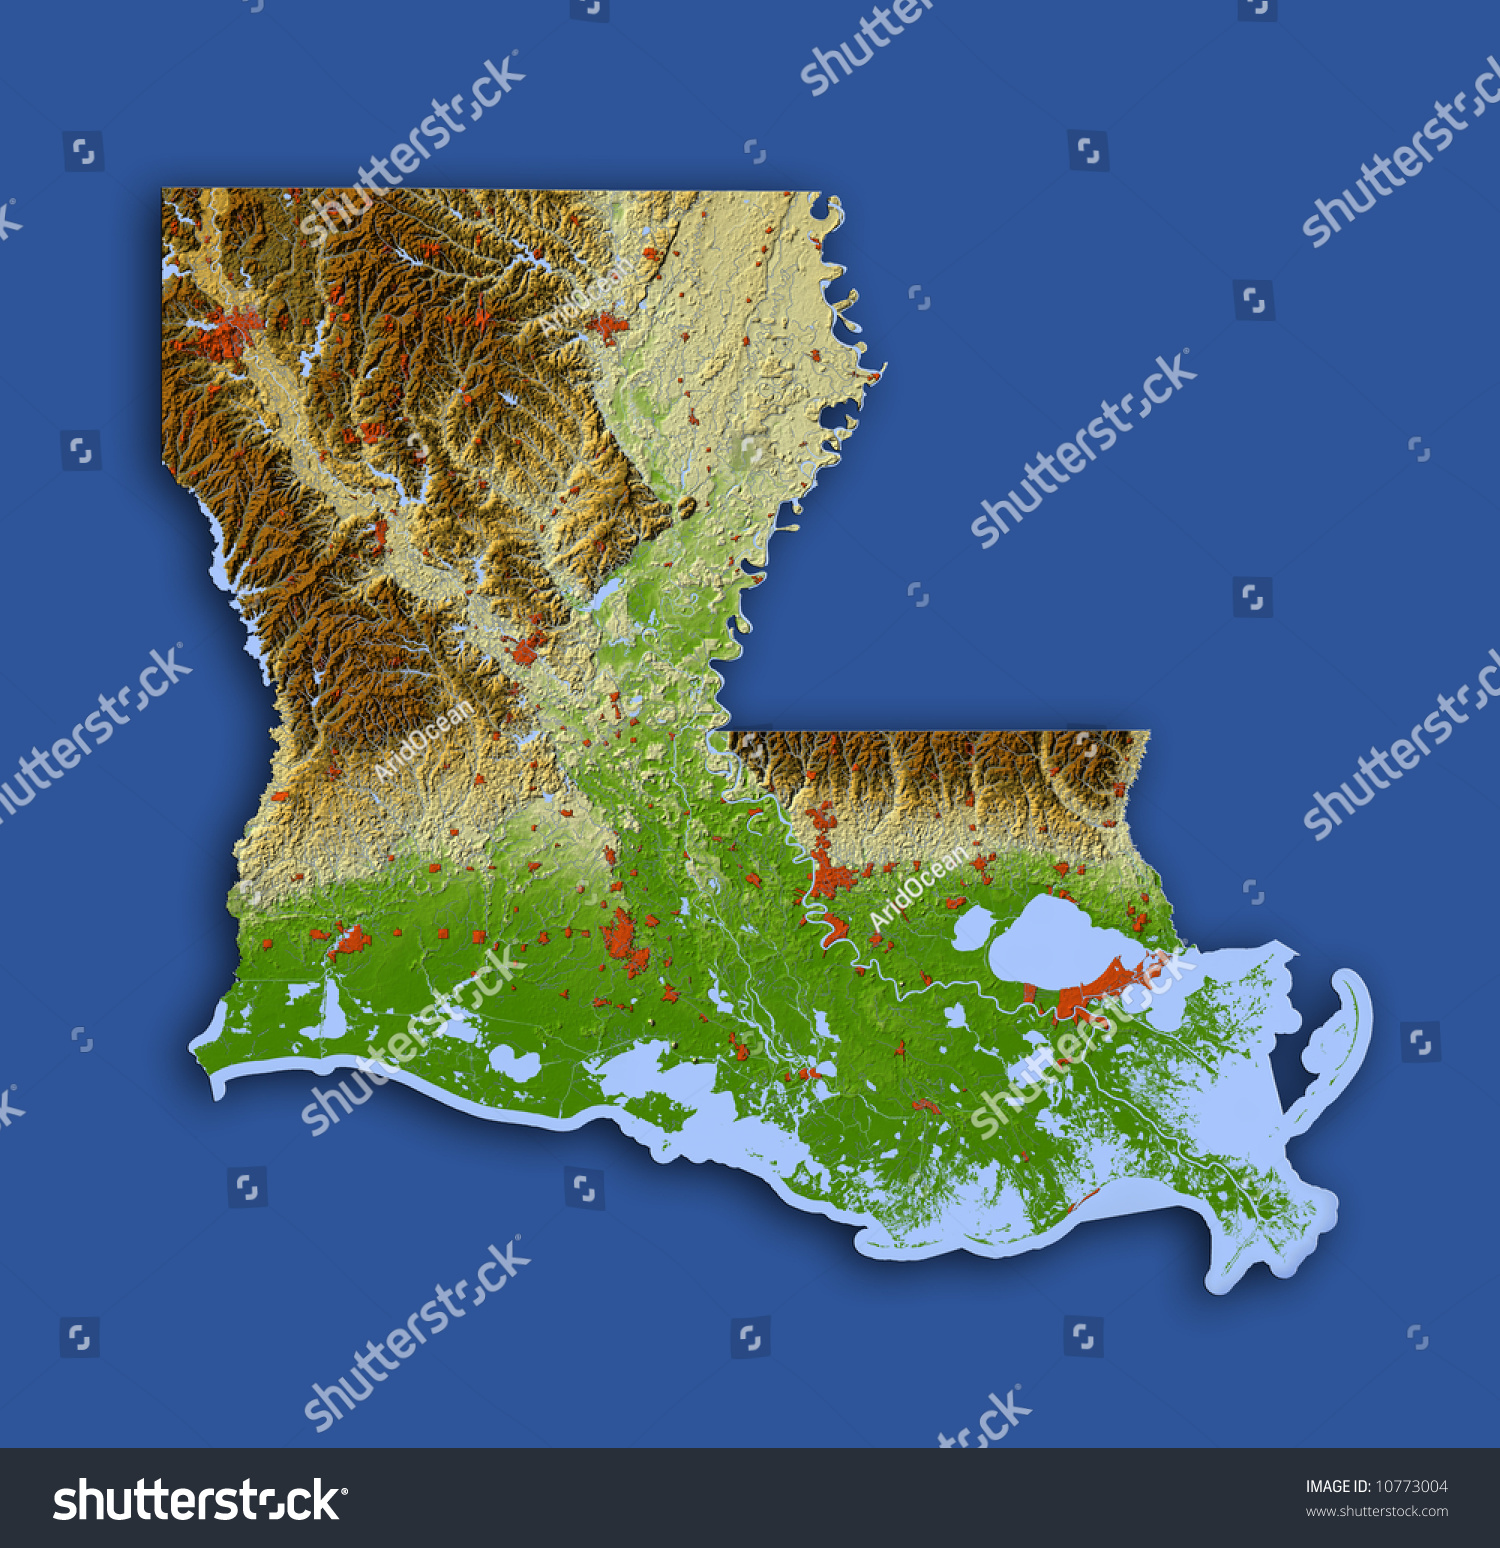 Louisiana. Shaded Relief Map. Shows Surrounding Ocean, Major Urban Areas And Rivers, Embossed On ...